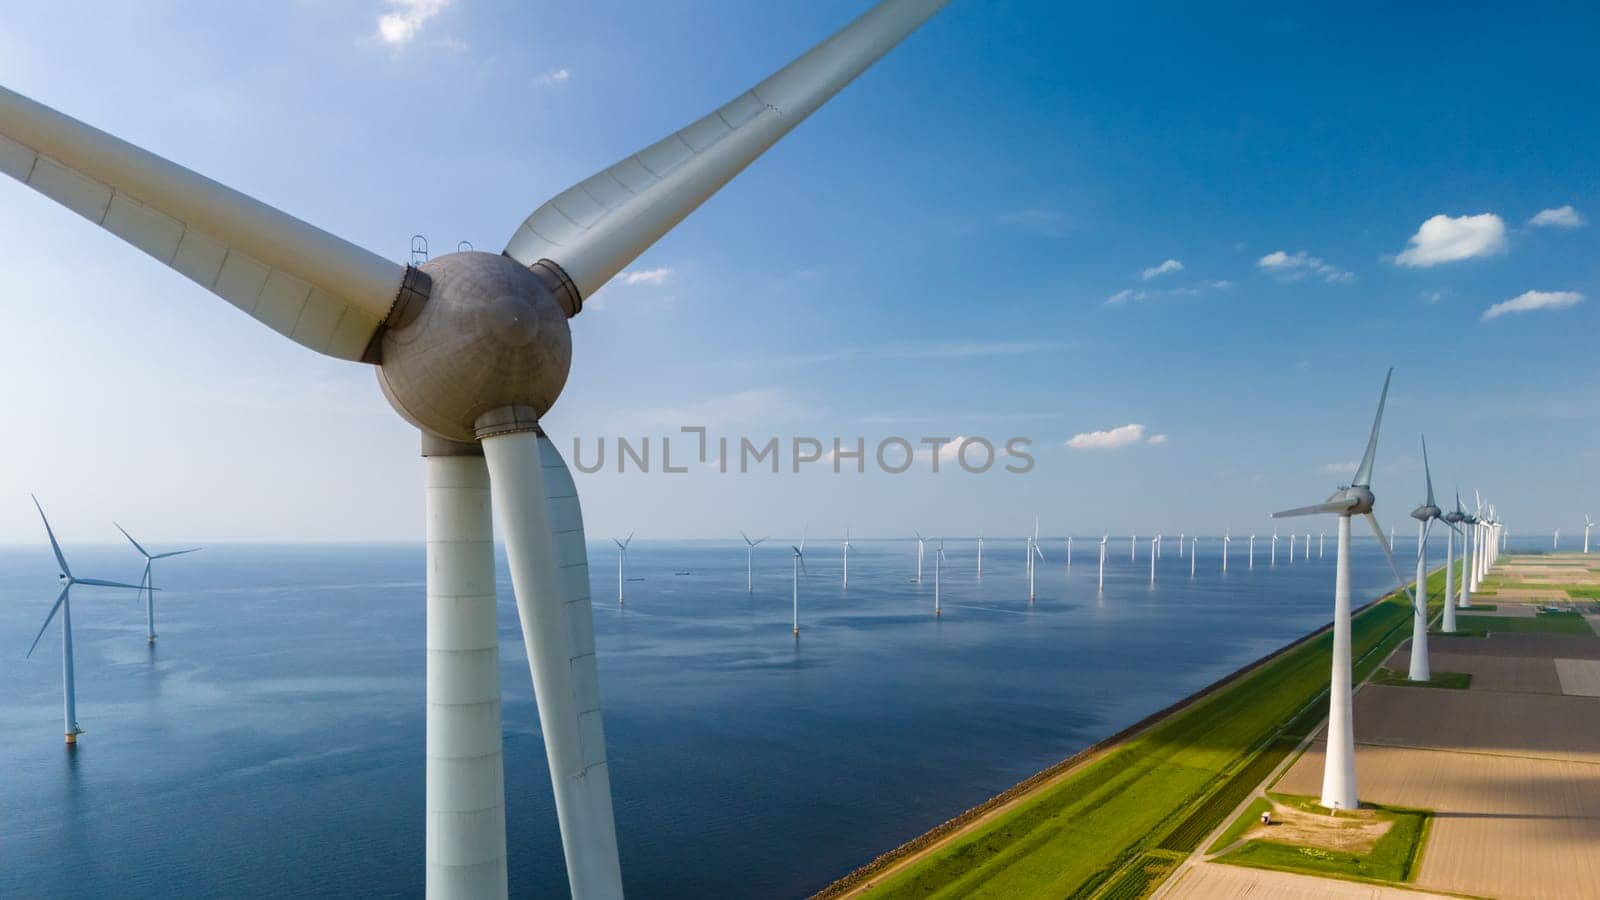 Aerial view of windmill turbines spinning gracefully in a wind farm near the ocean in the Netherlands Flevoland.